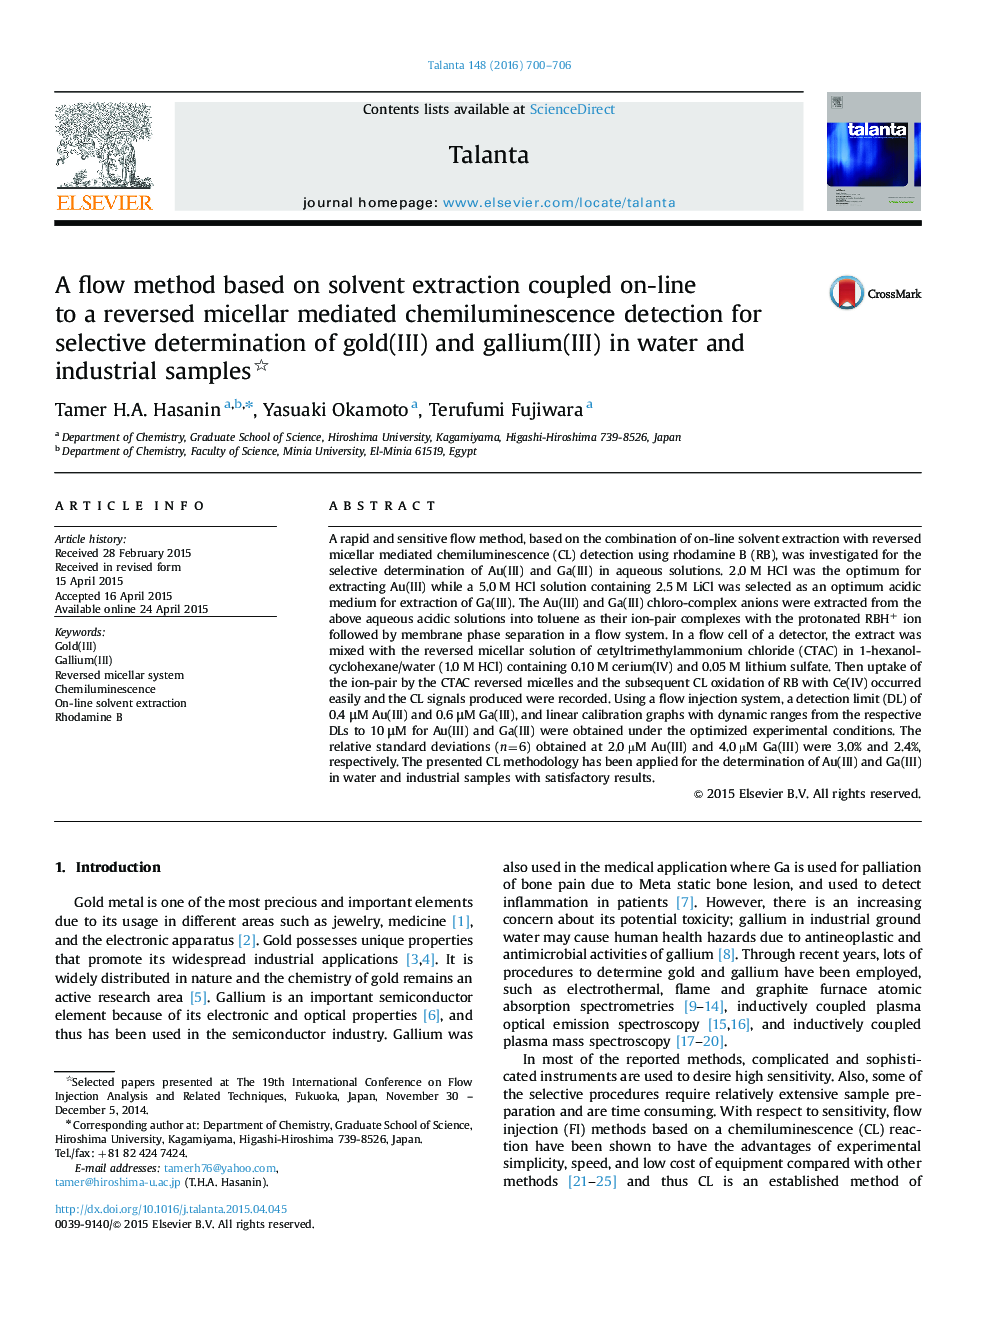 A flow method based on solvent extraction coupled on-line to a reversed micellar mediated chemiluminescence detection for selective determination of gold(III) and gallium(III) in water and industrial samples 